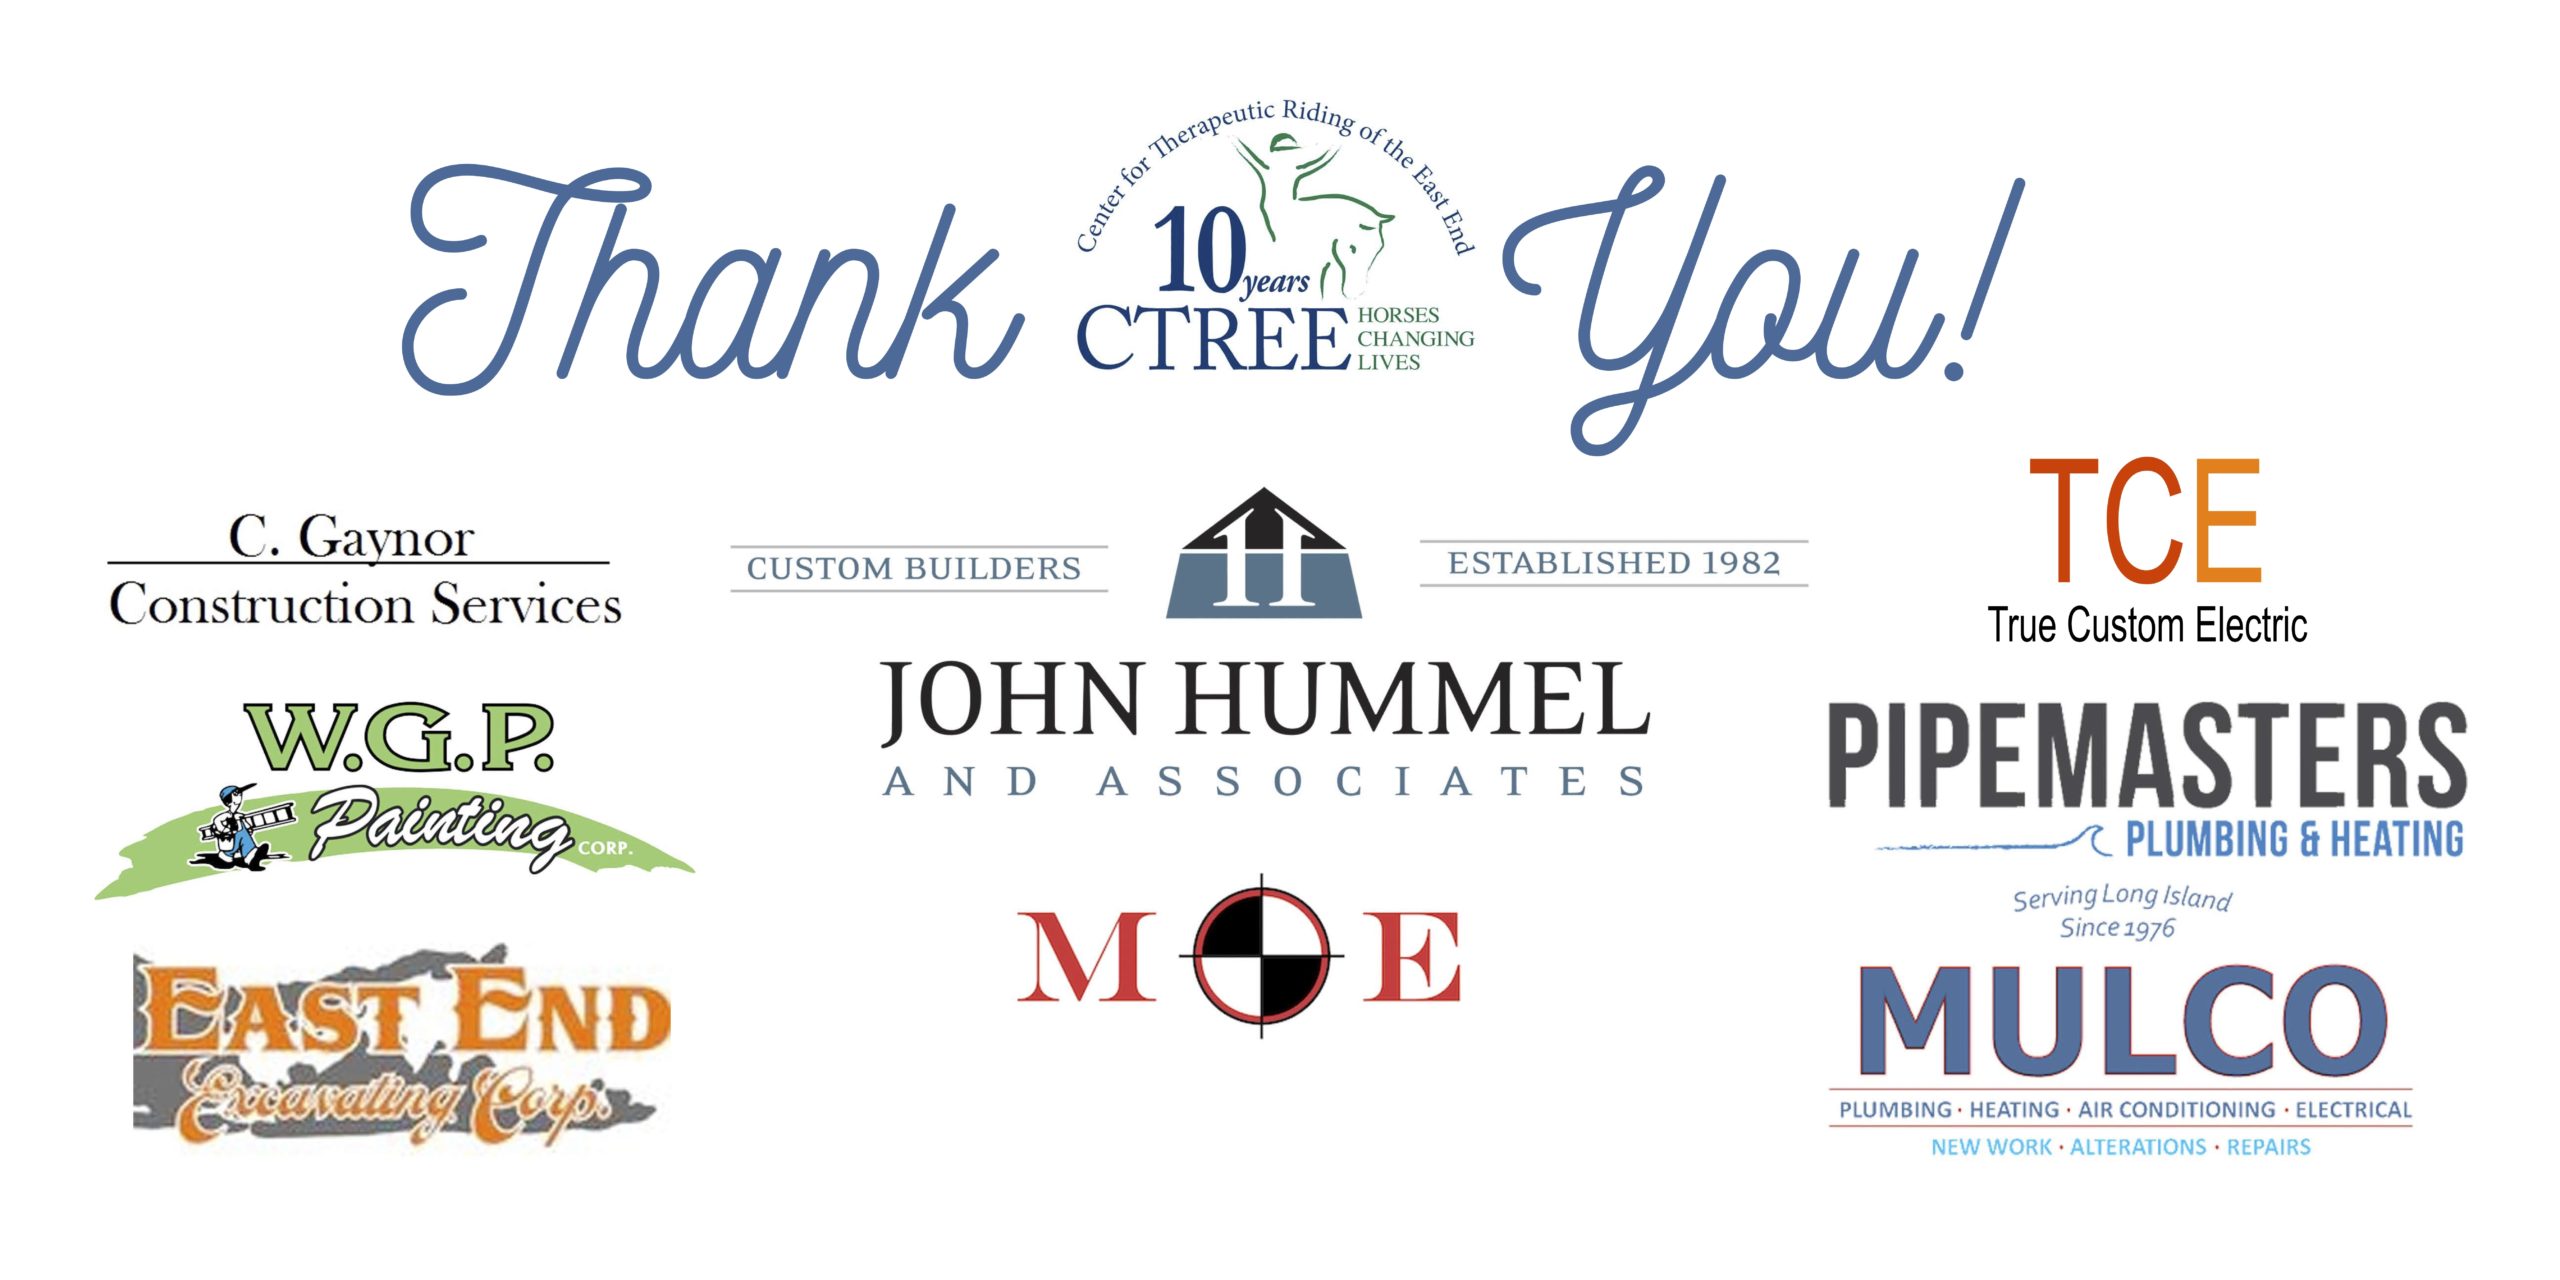 CTREE's thank you banner, honoring their donors.